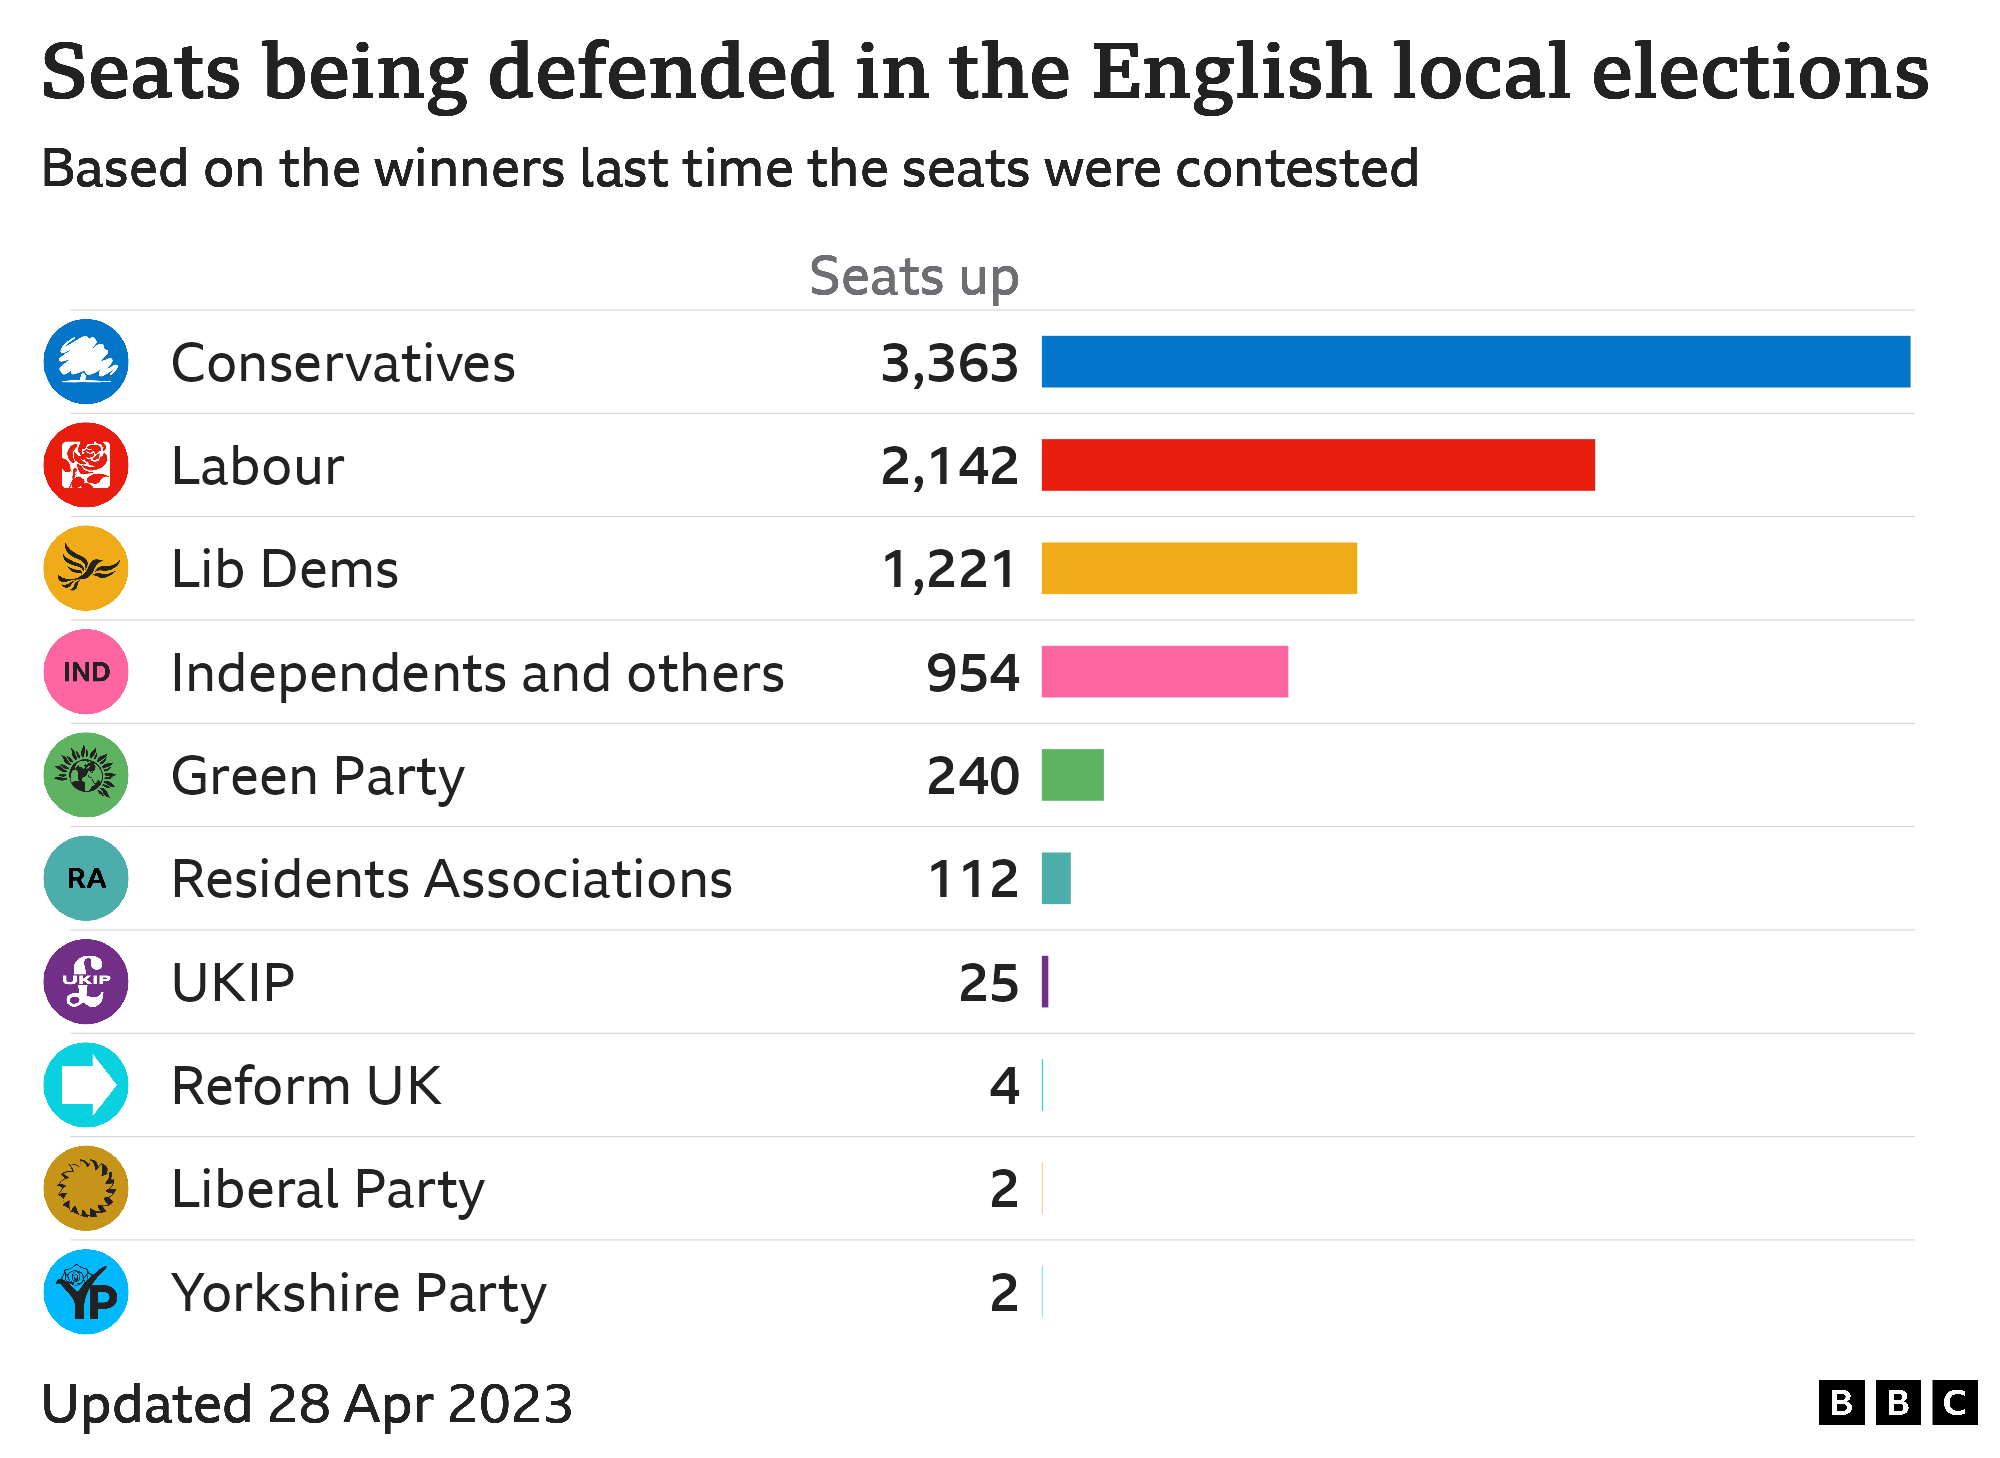 Bar chart showing council seats defended by each party in England, Conservatives 3363, Labour 2142, Lib Dems 1221, Independents and others 954, Green Party 240, Residents Associations 112, UKIP 25, Reform UK 4, Liberal Party 2, Yorkshire Party 2